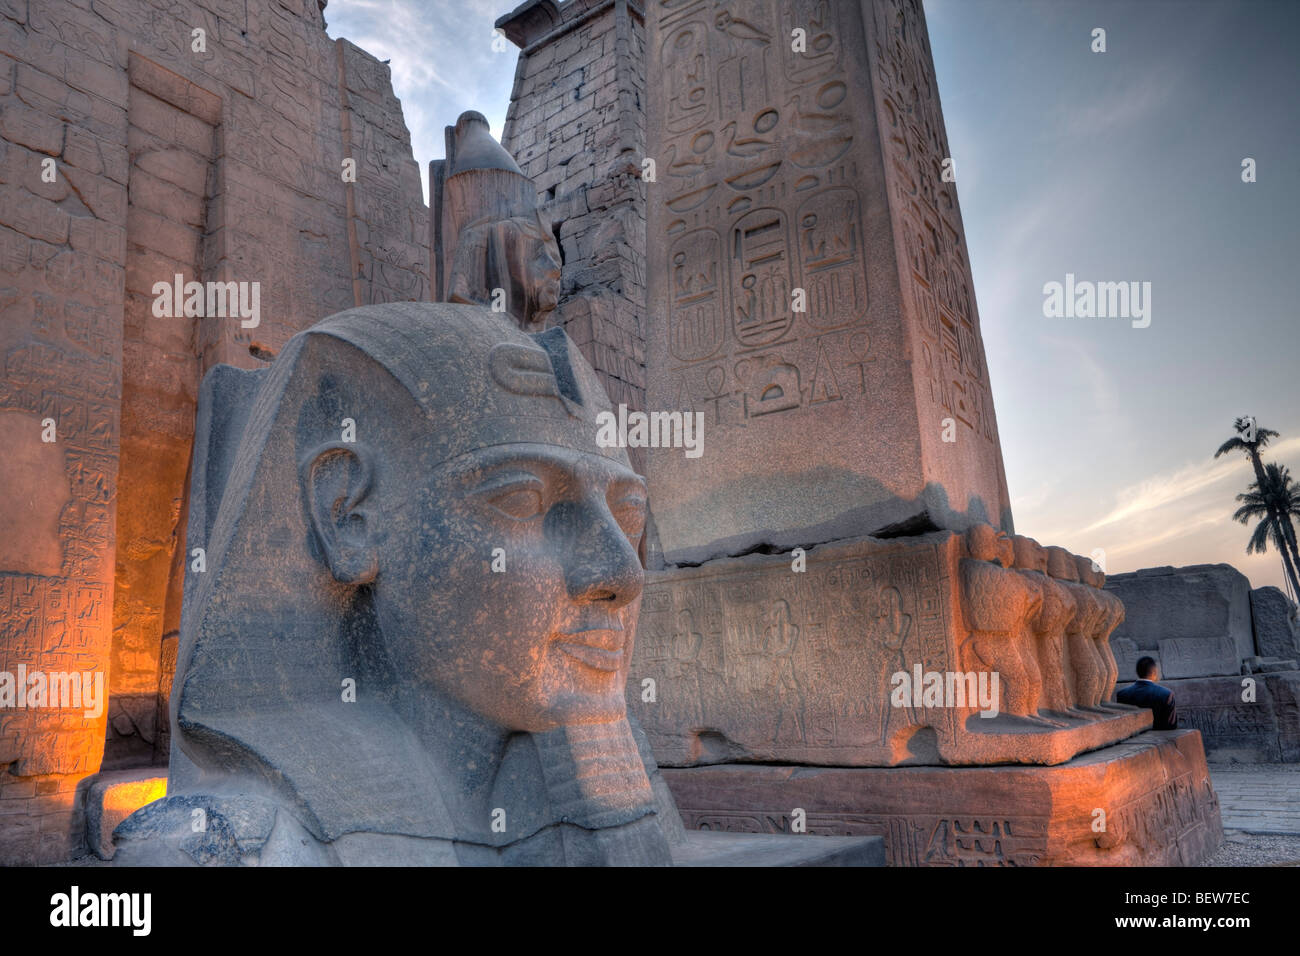 Illuminated Entrance of Luxor Temple with Ramesses II Statue and Obelisk, Luxor, Egypt Stock Photo